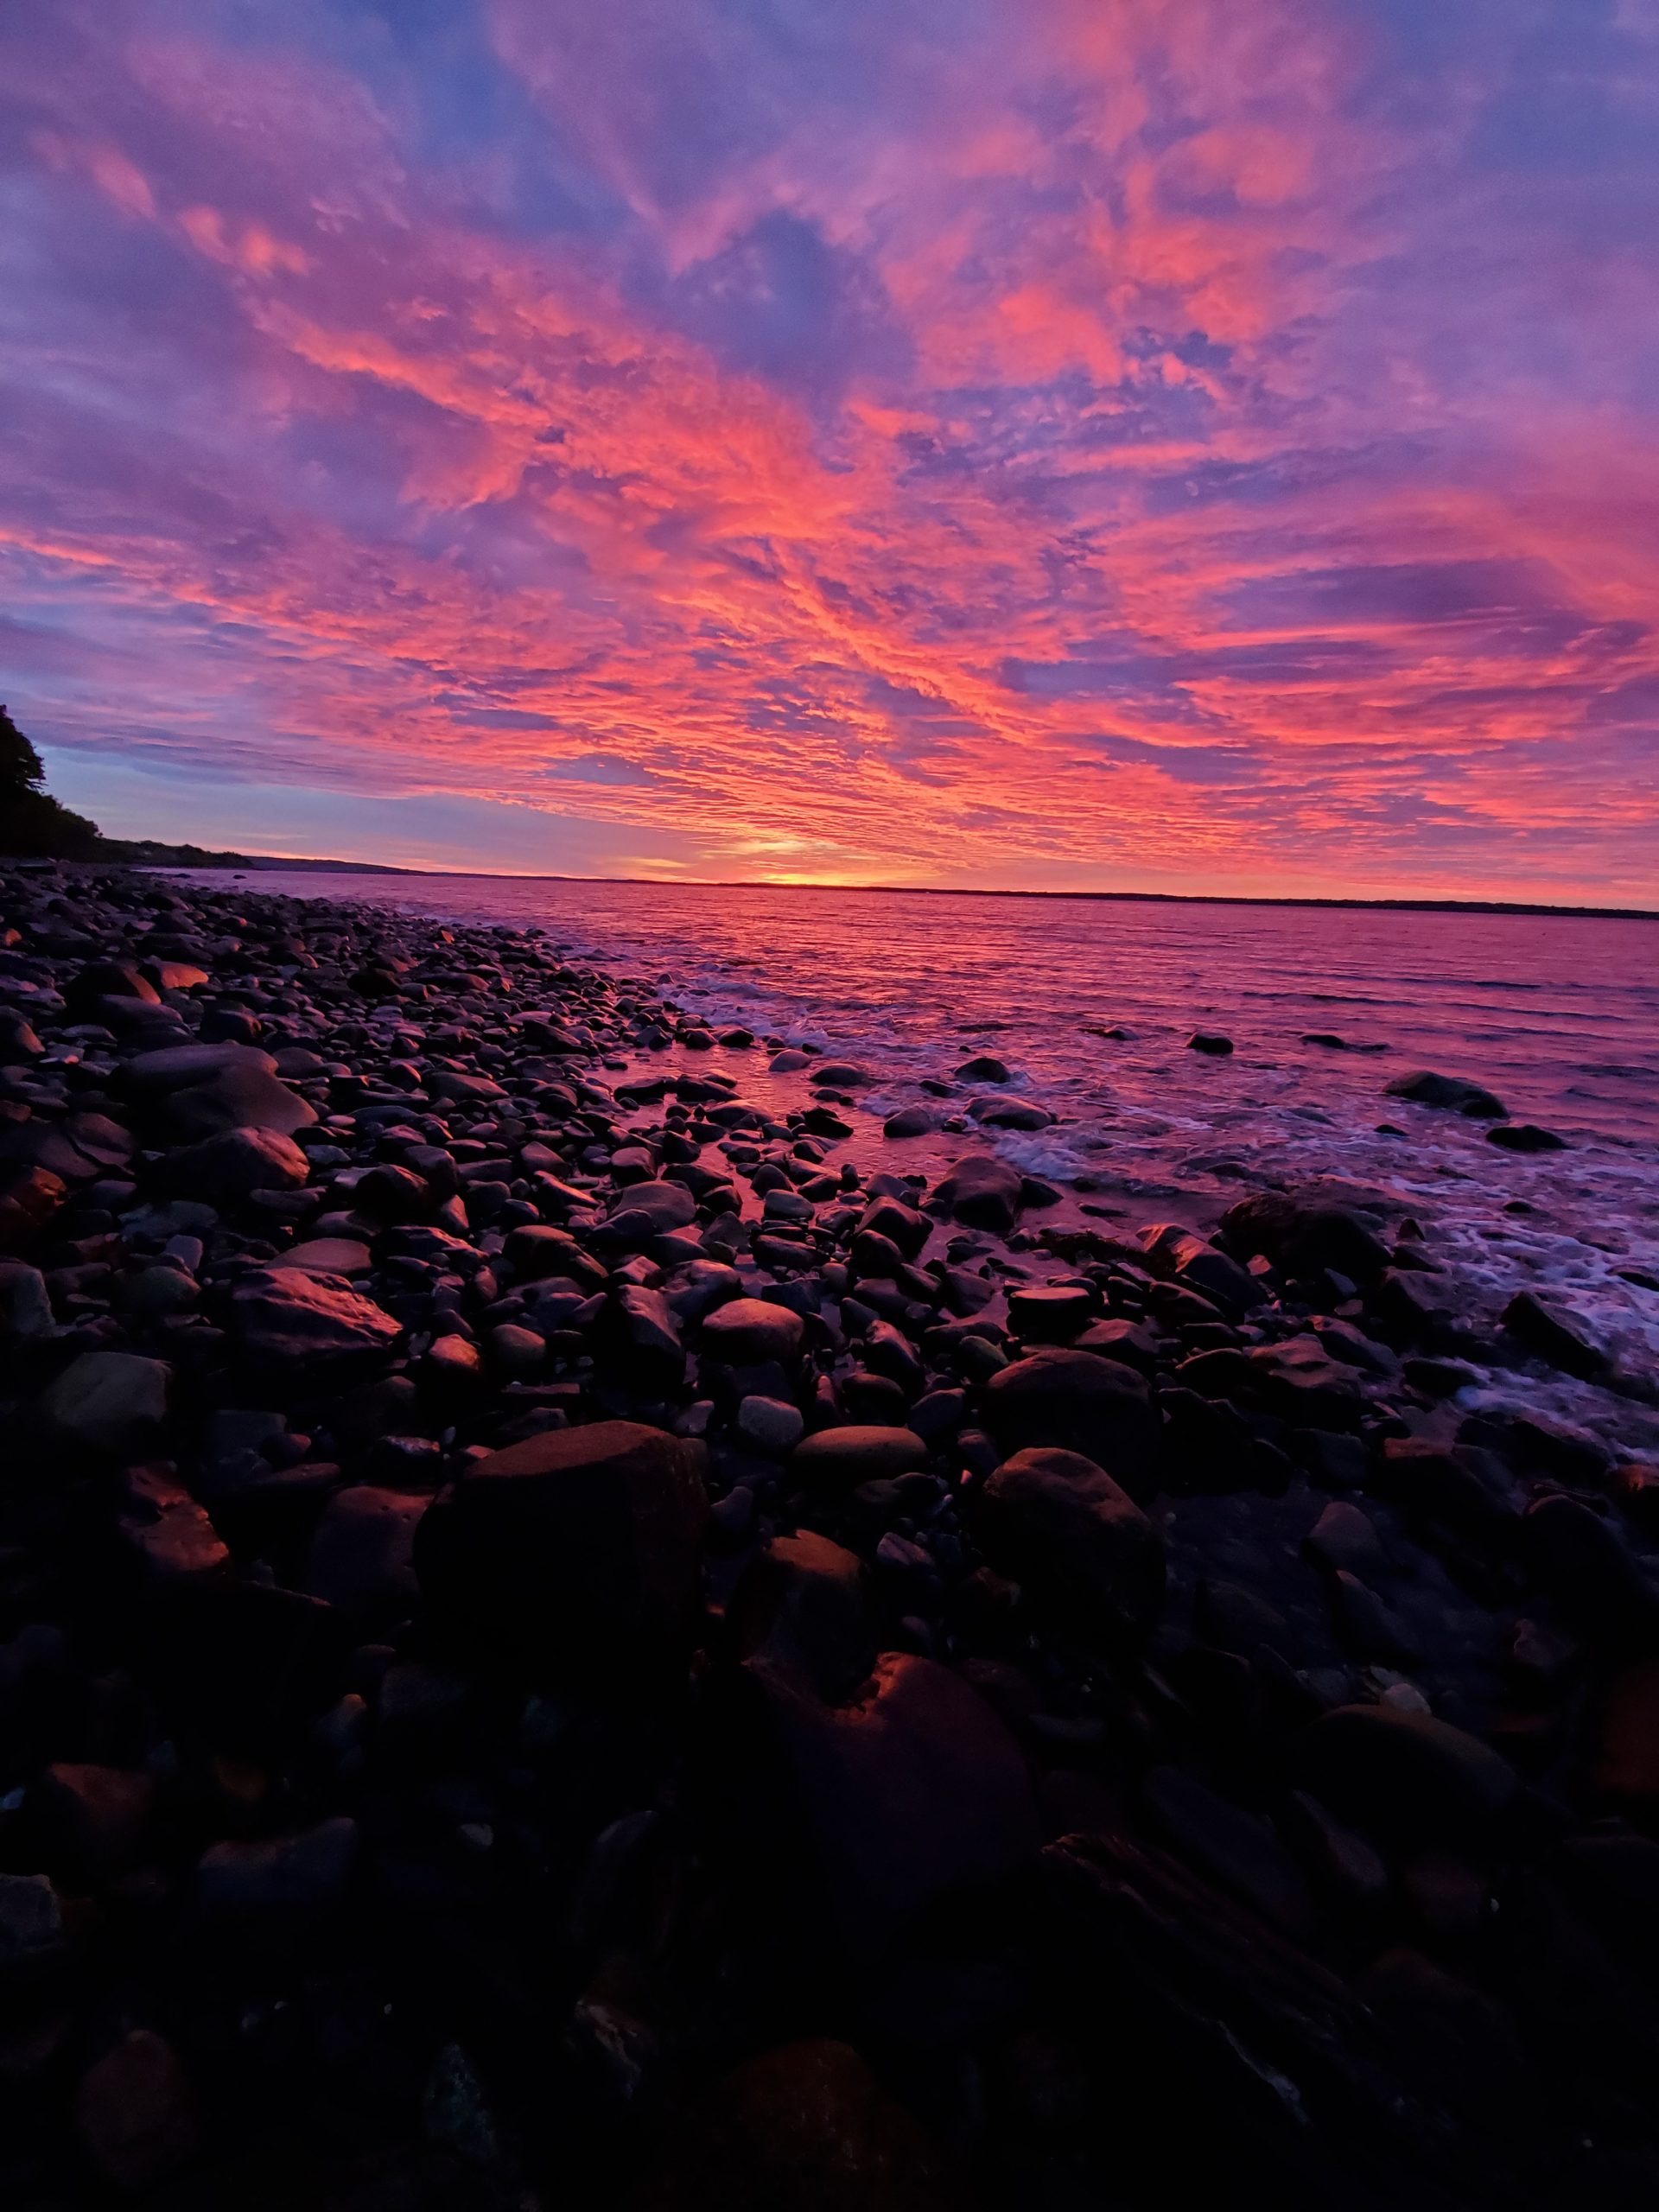 Maine romantic getaways - sunsets over the ocean